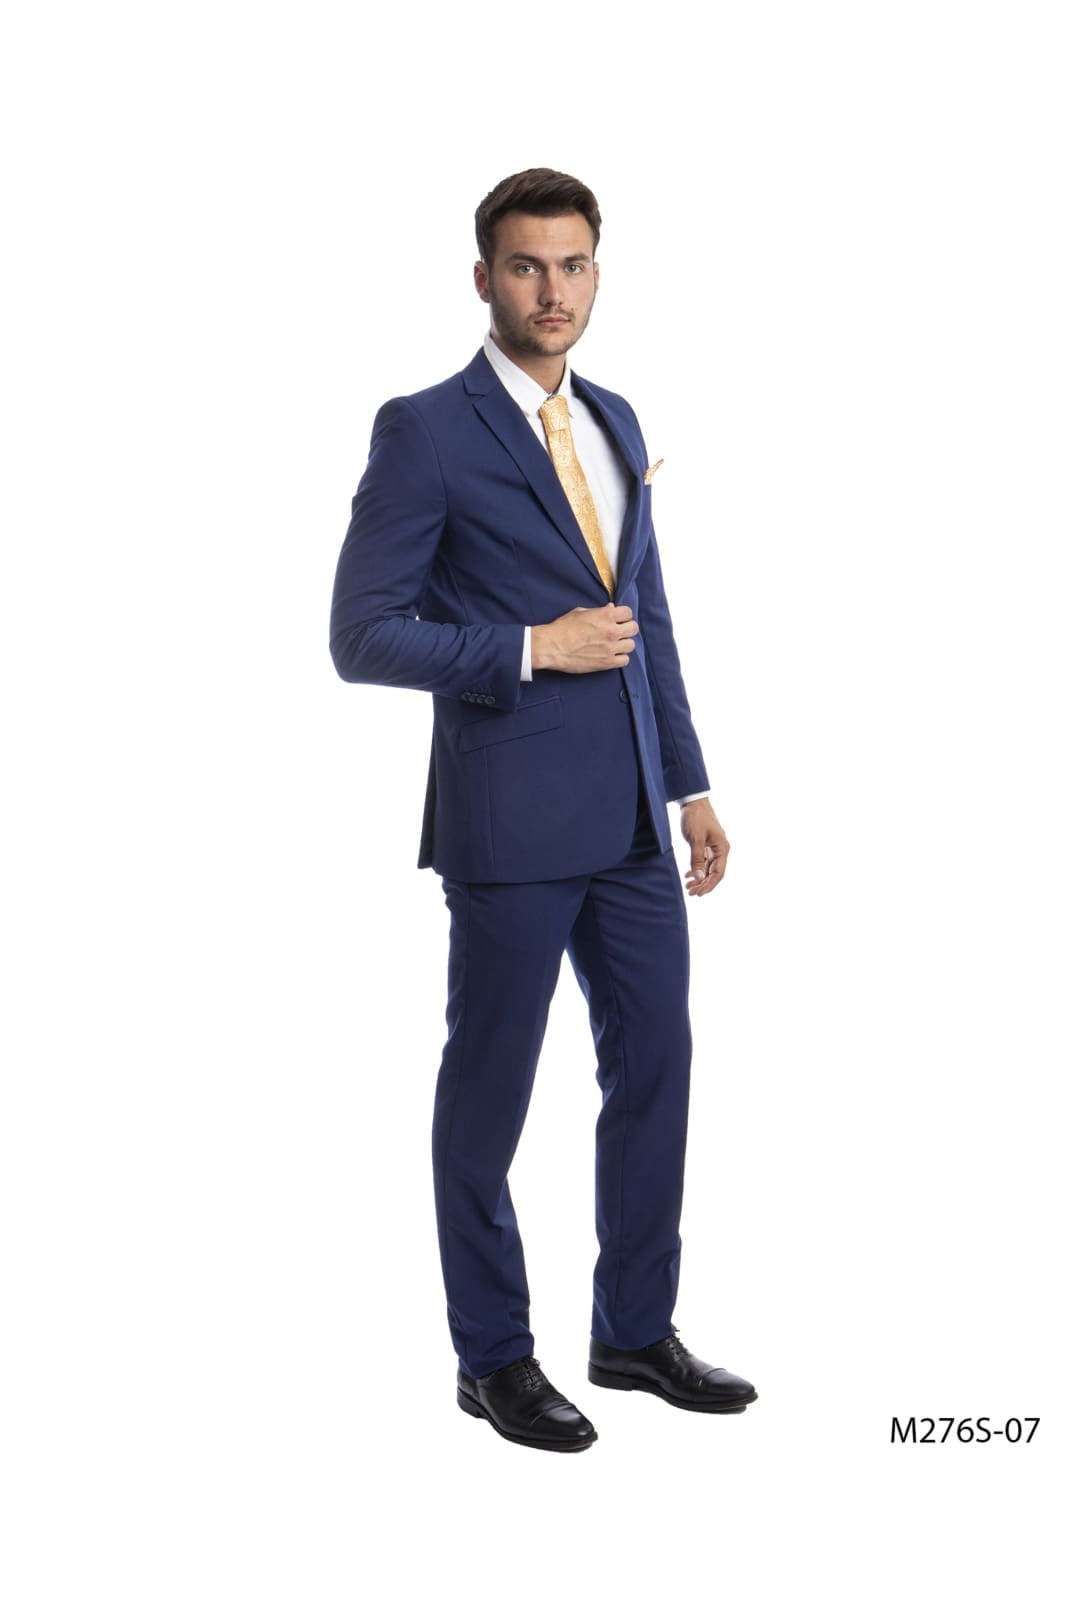 BEST SUITS COLOR COMBINATIONS EVERY MAN MUST HAVE IN THEIR WARDROBE